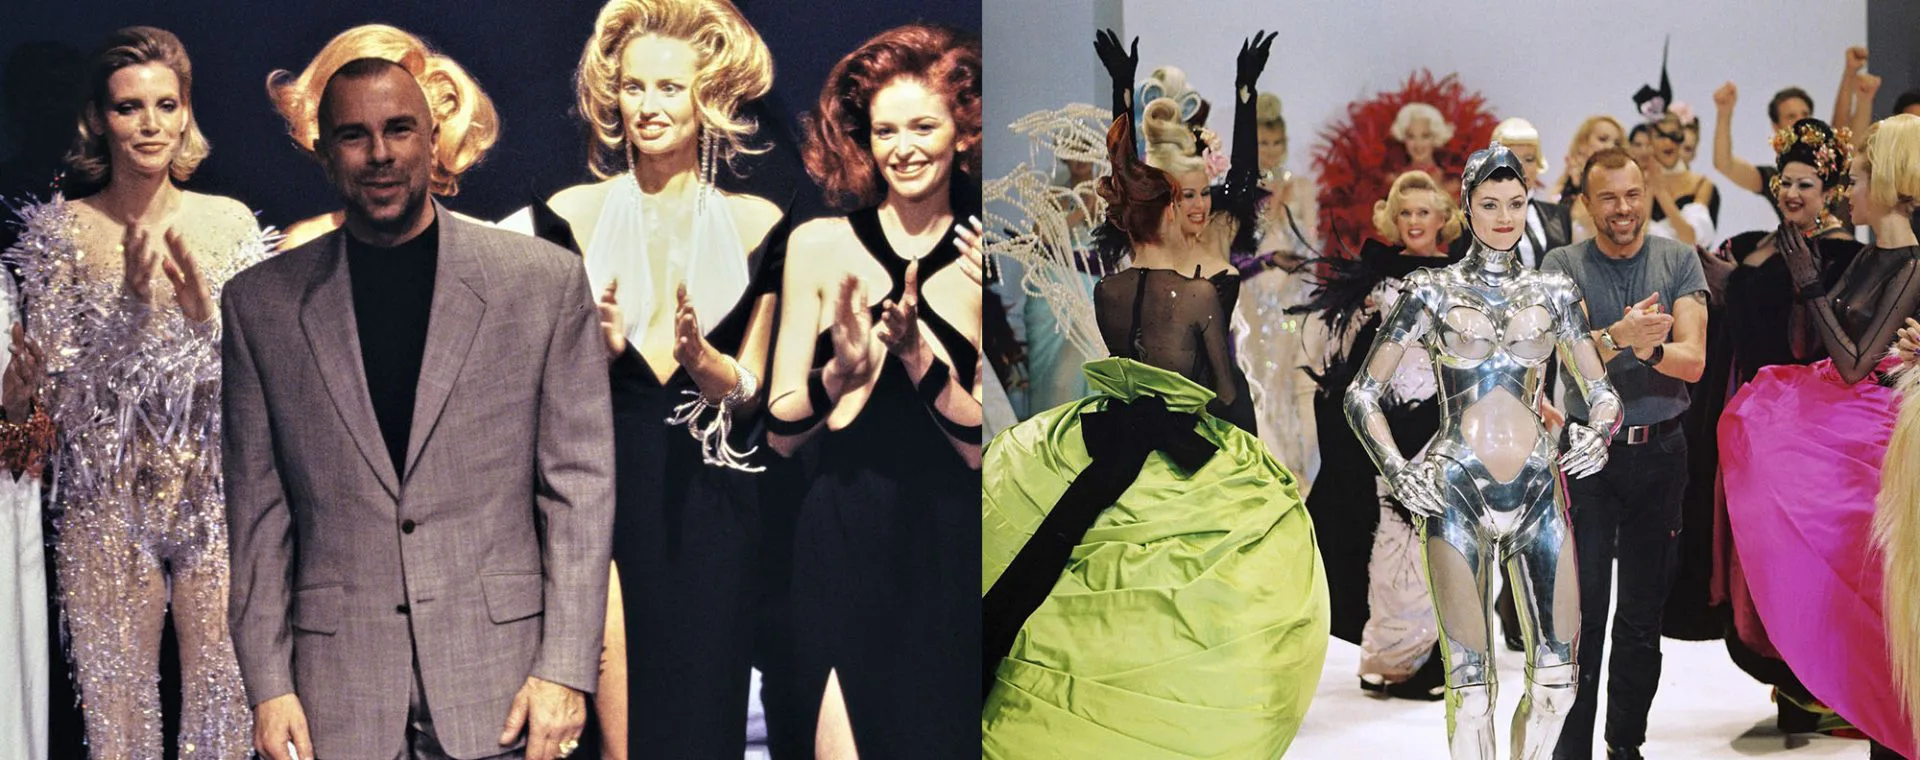 Manfred Thierry Mugler, the iconic designer of the 80's, has died